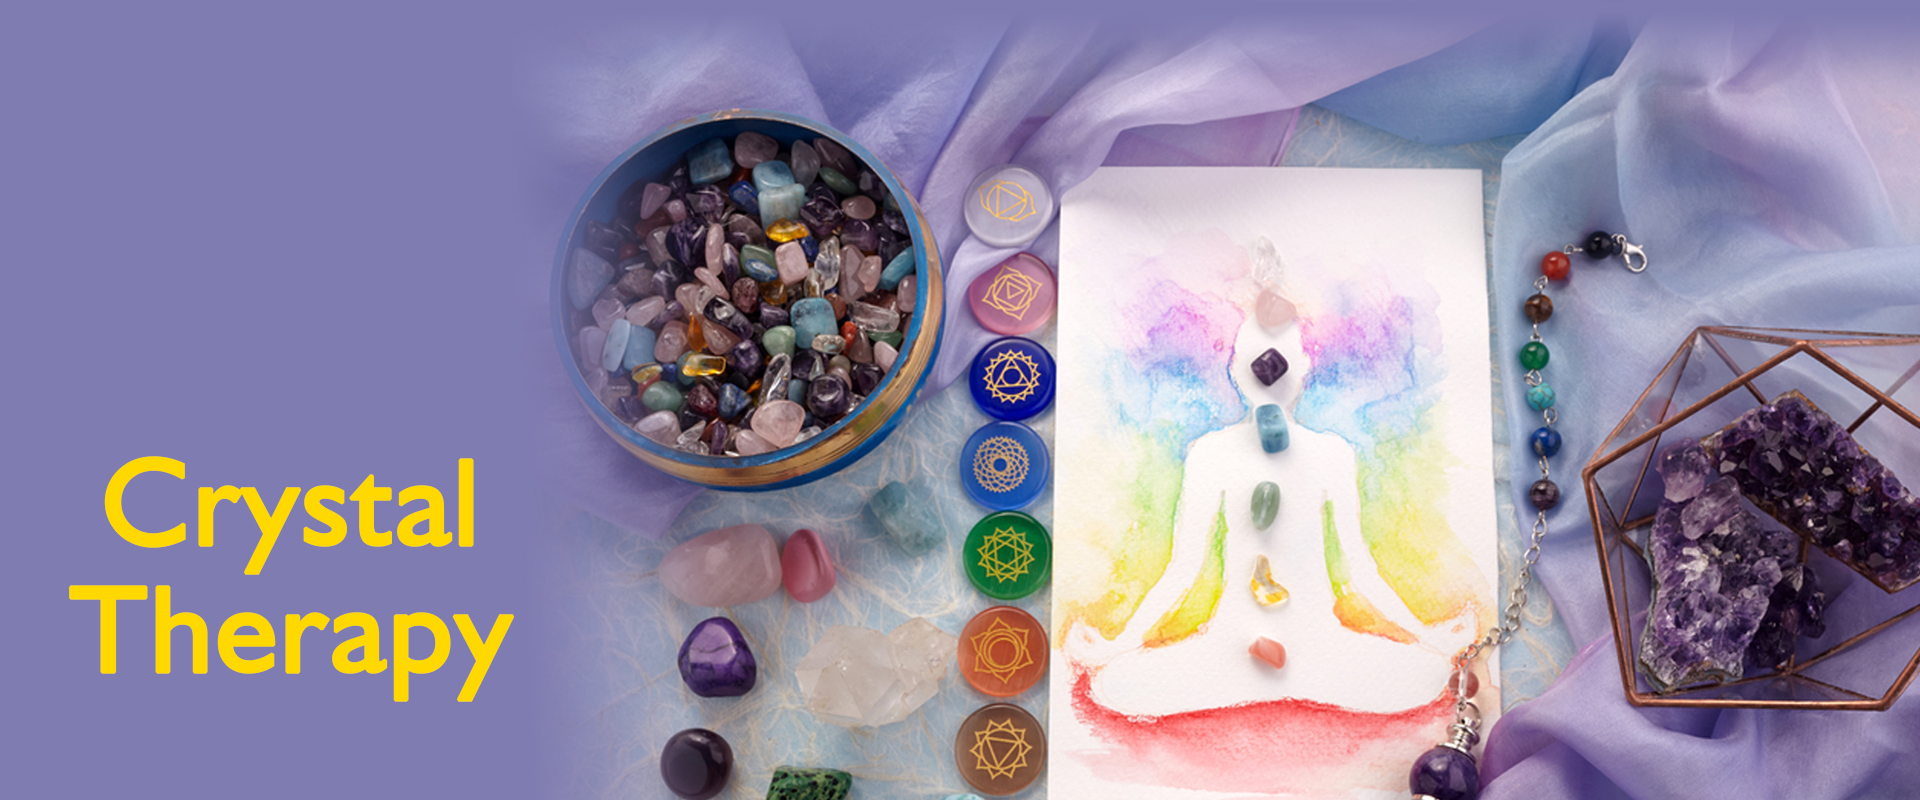 Crystal Therapy banner